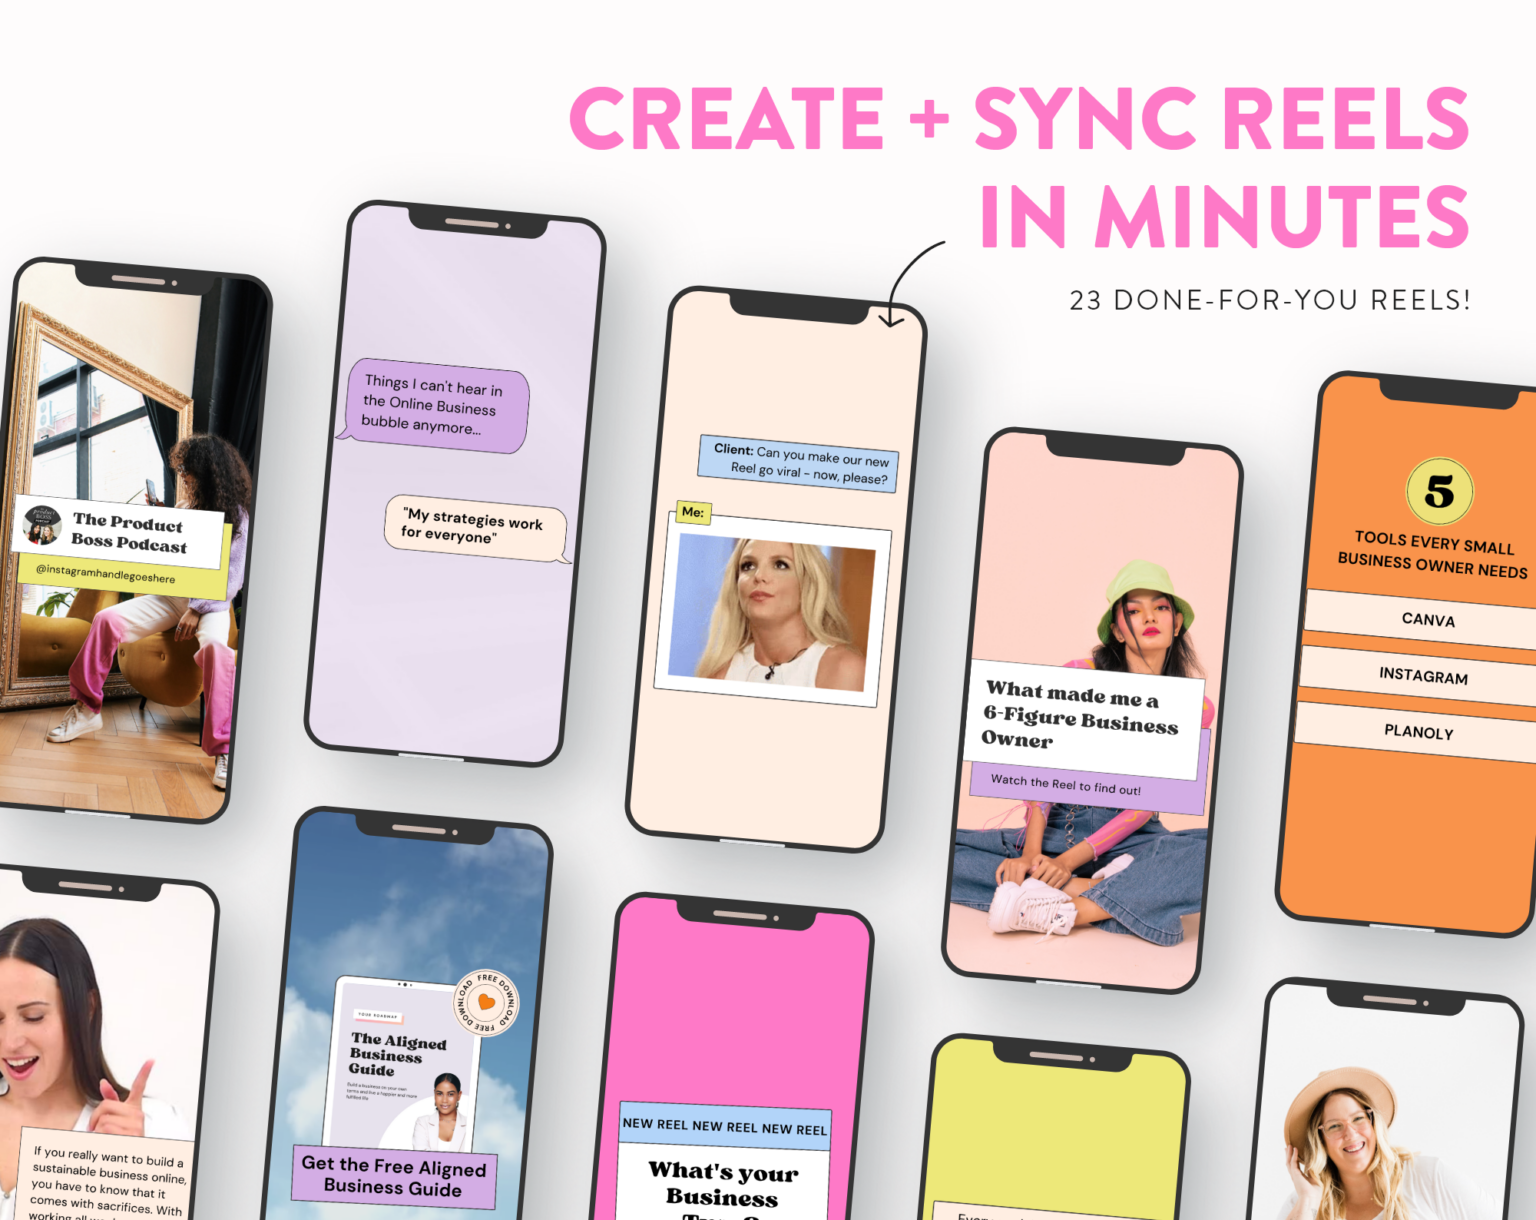 Instagram-reels-challenge-templates-for-canva-sync-in-minutes-3